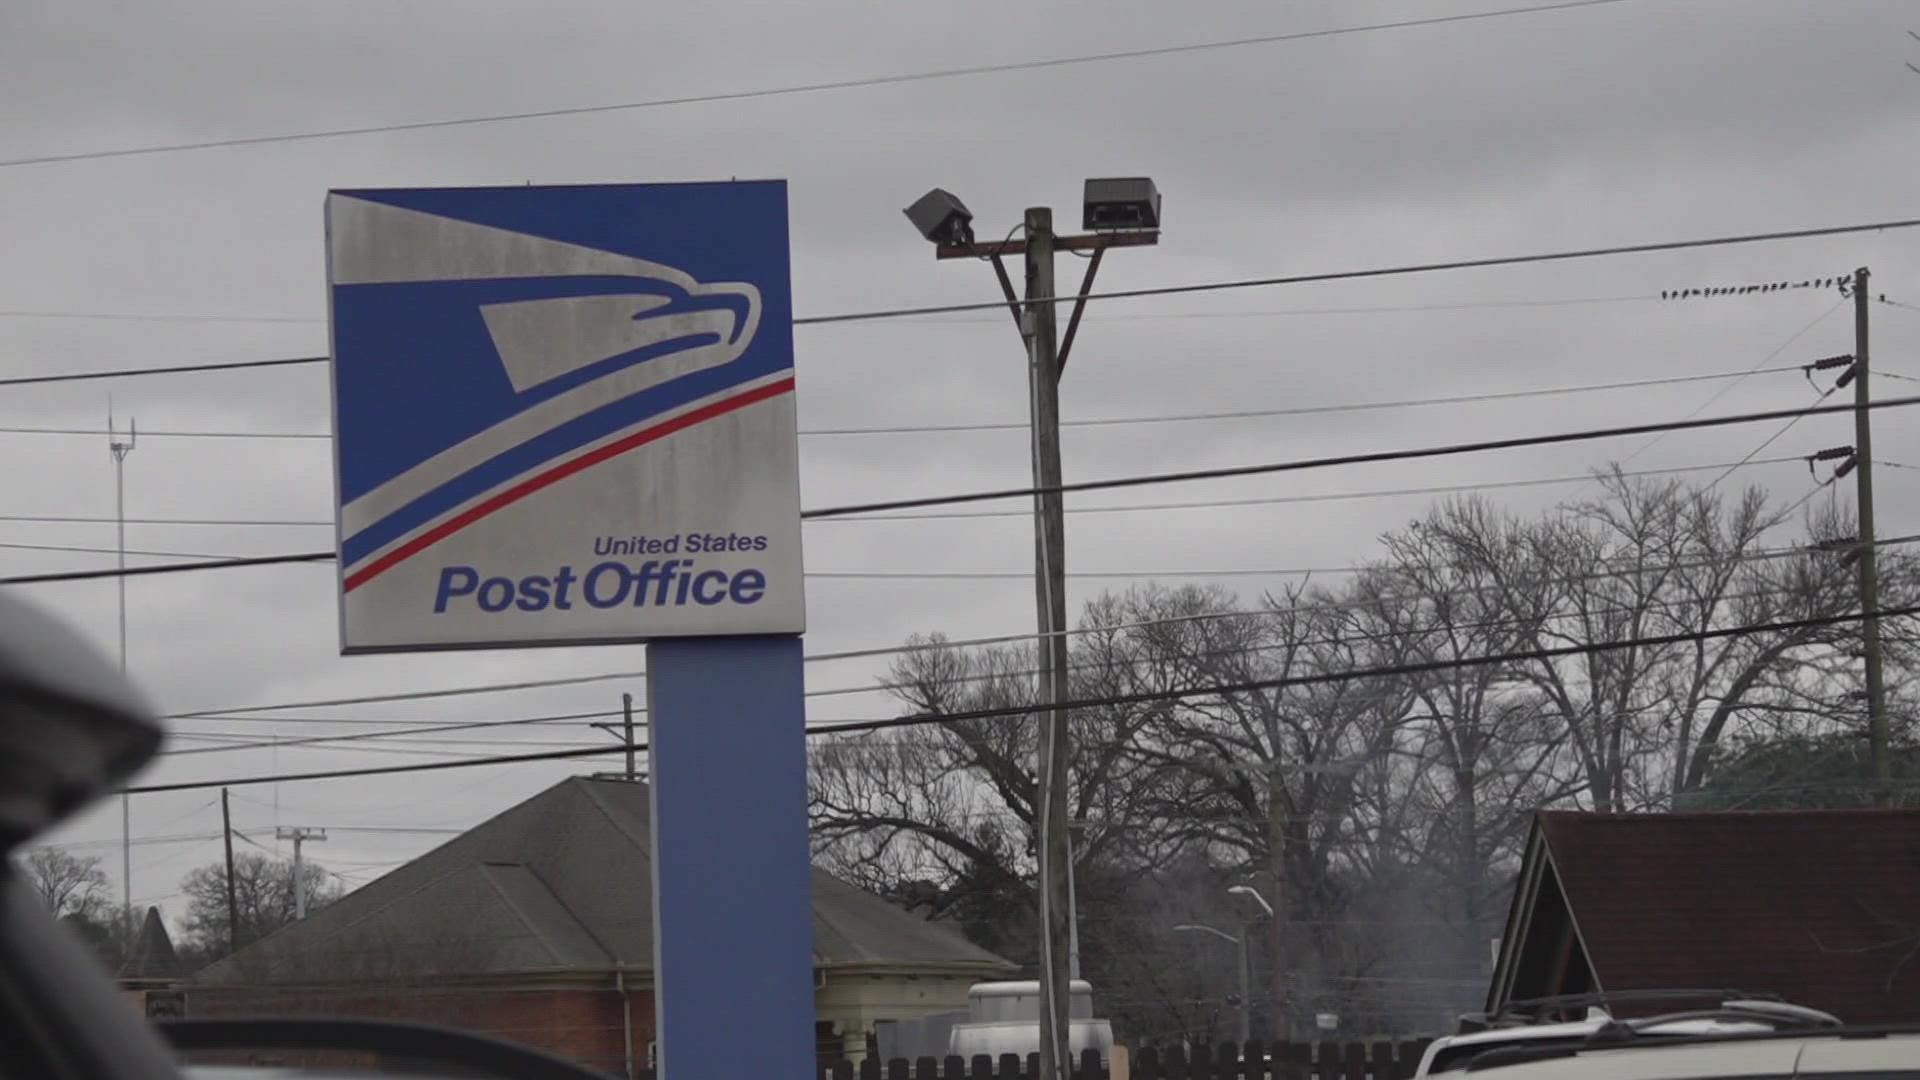 Many people across Knoxville said USPS service is taking too long to deliver their mail, including in areas like Fountain City and West Knoxville.